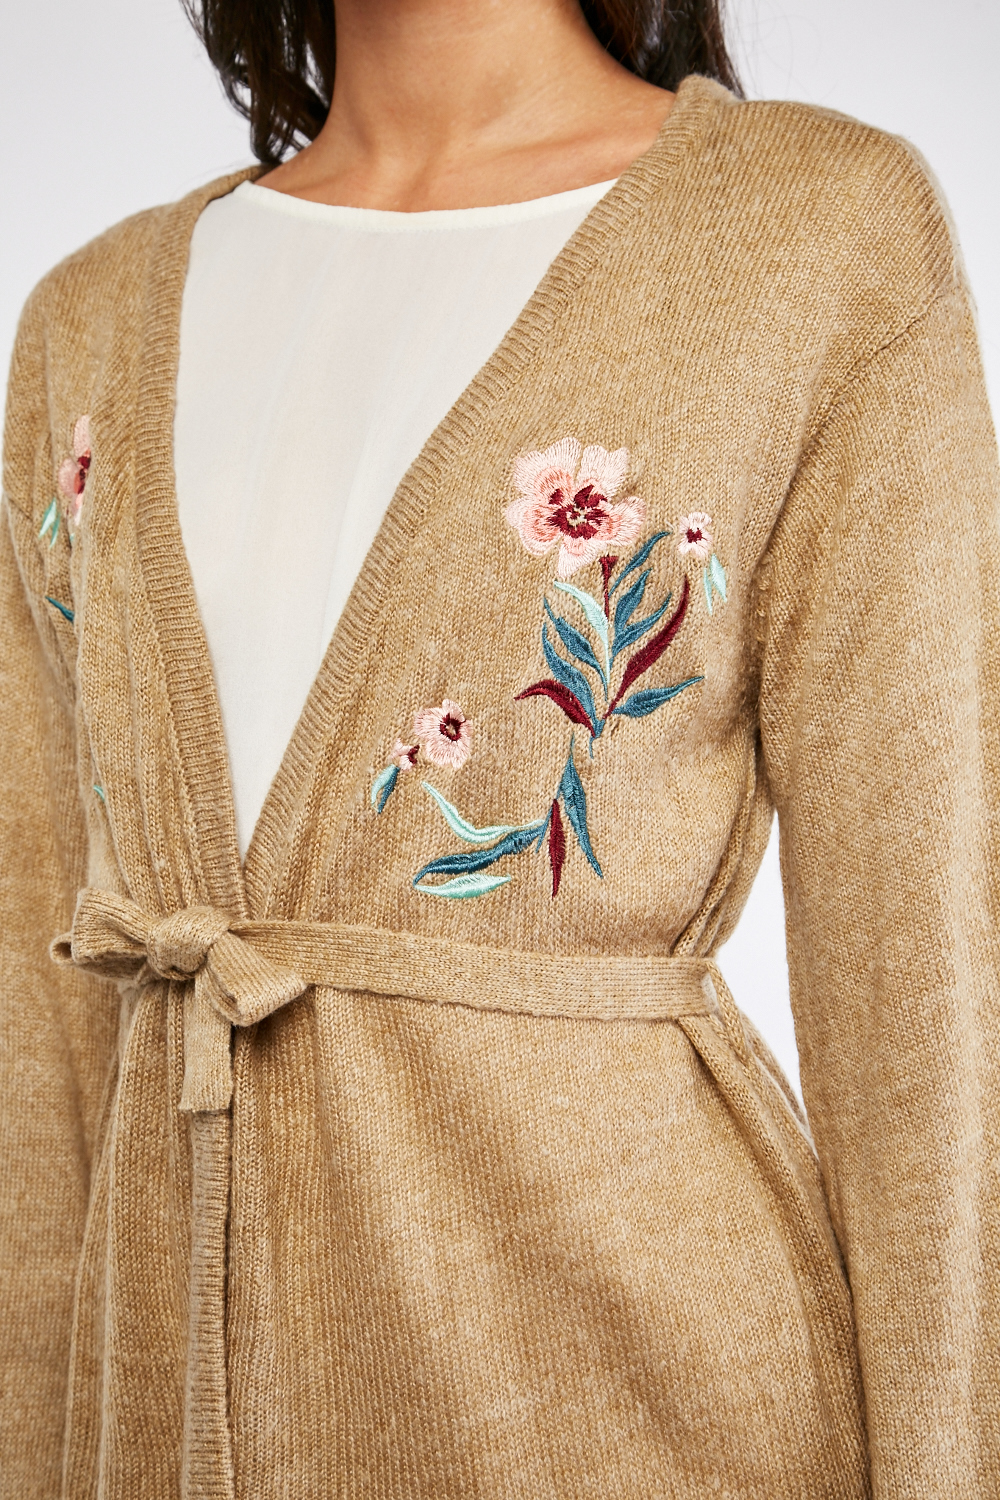 Embroidered Flower Knit Cardigan - Just $7